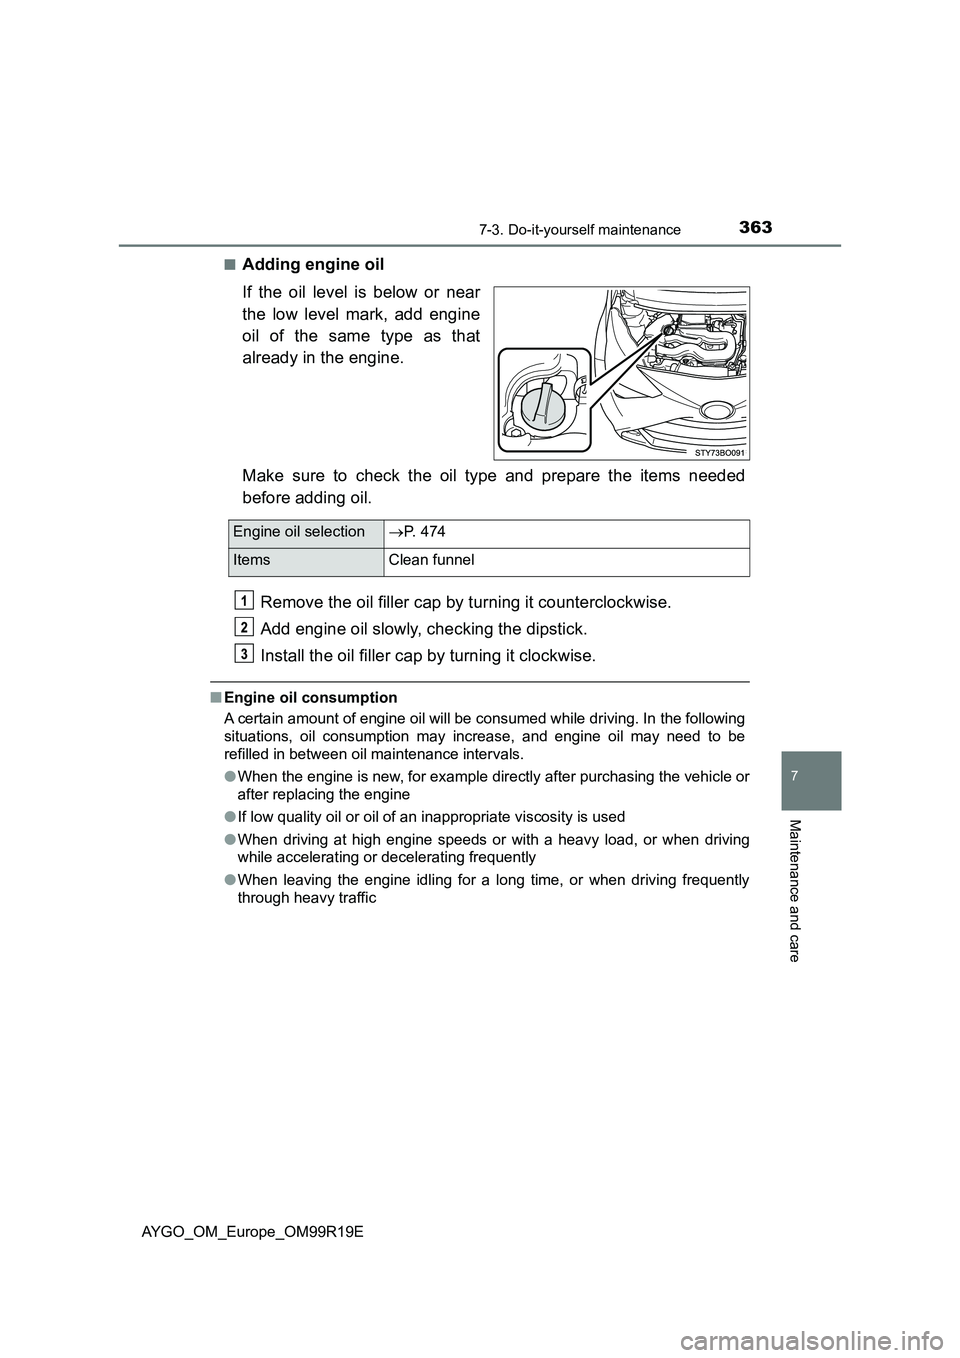 TOYOTA AYGO 2019  Owners Manual (in English) 3637-3. Do-it-yourself maintenance
7
Maintenance and care
AYGO_OM_Europe_OM99R19E 
■Adding engine oil 
If the oil level is below or near 
the low level mark, add engine 
oil of the same type as that